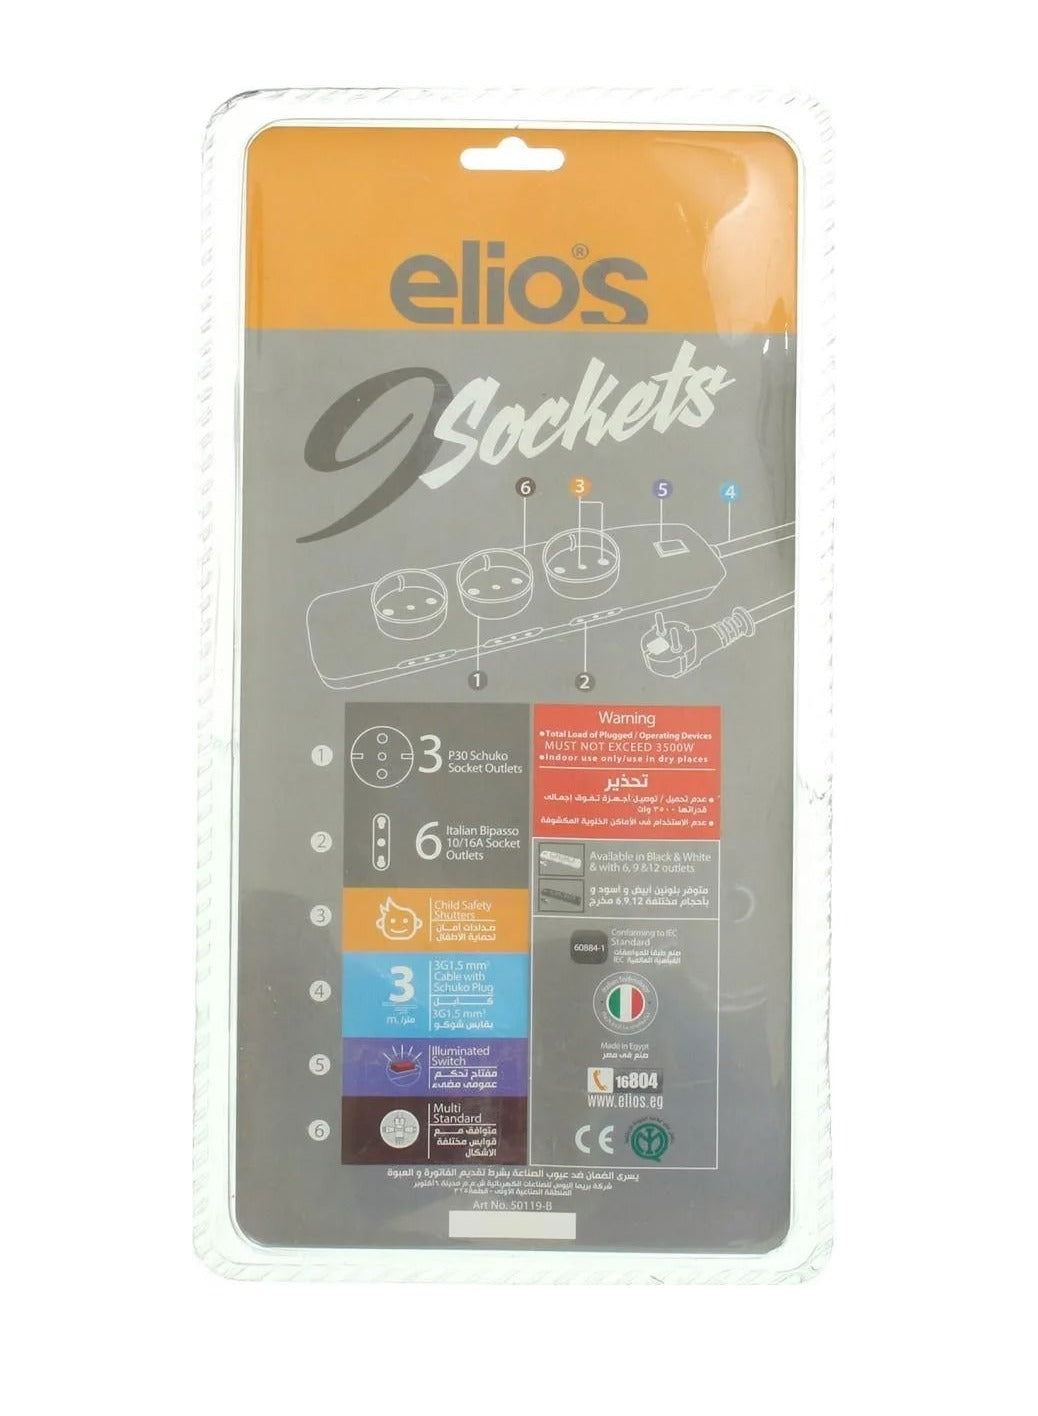 Elios Electric Power Outlets Sockets power strip with 9 outlets - Black